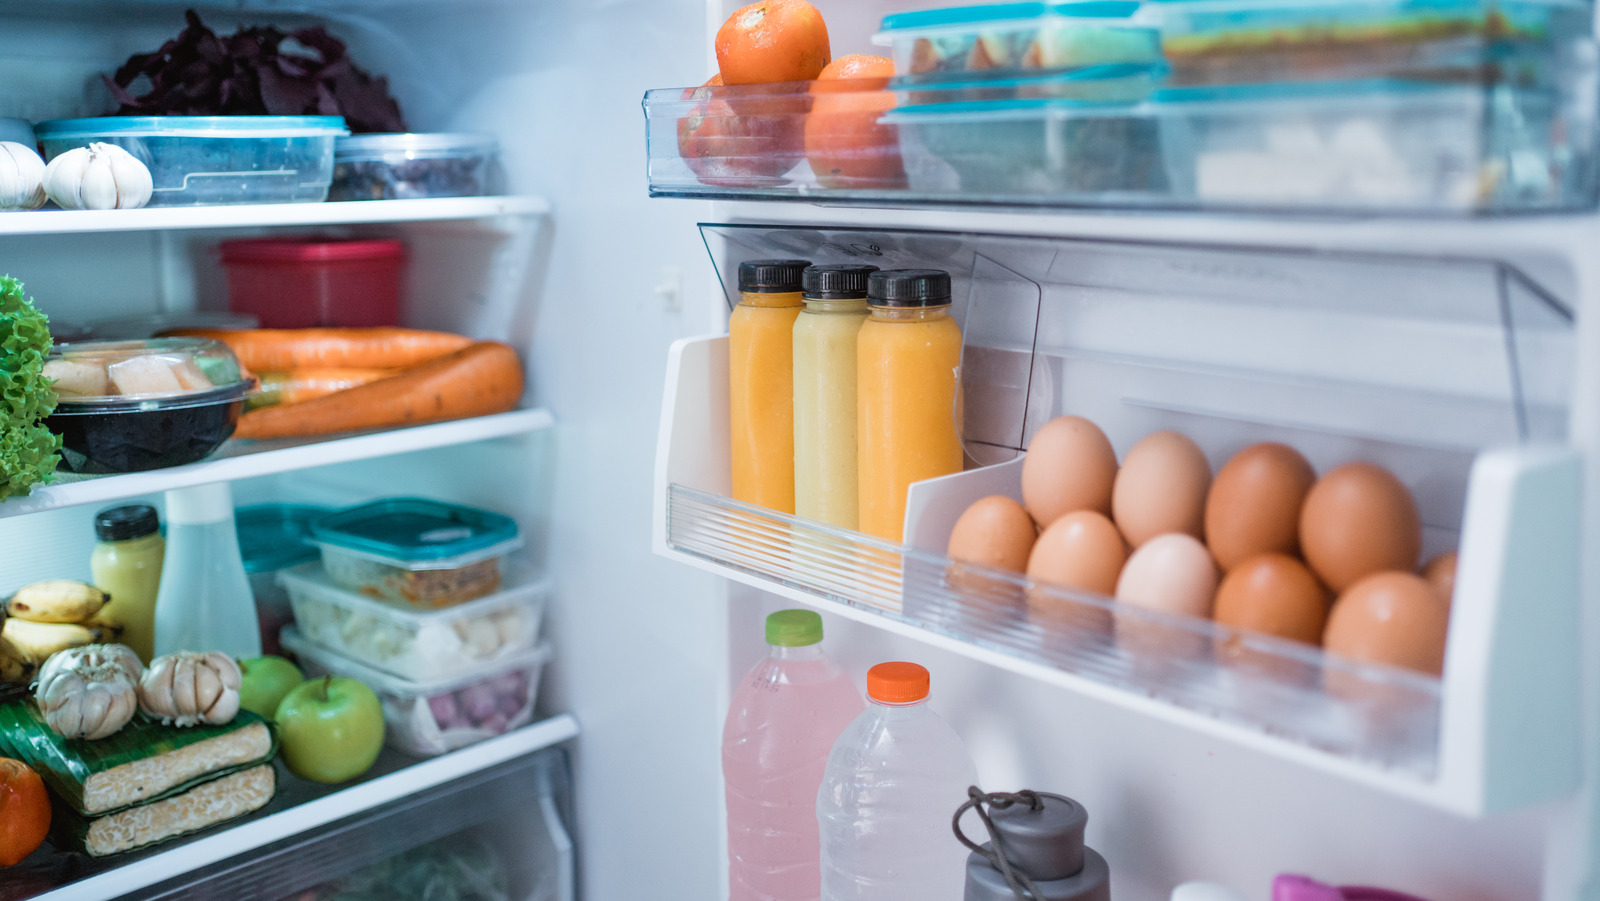 How to Keep Food Cold in a Broken Refrigerator 